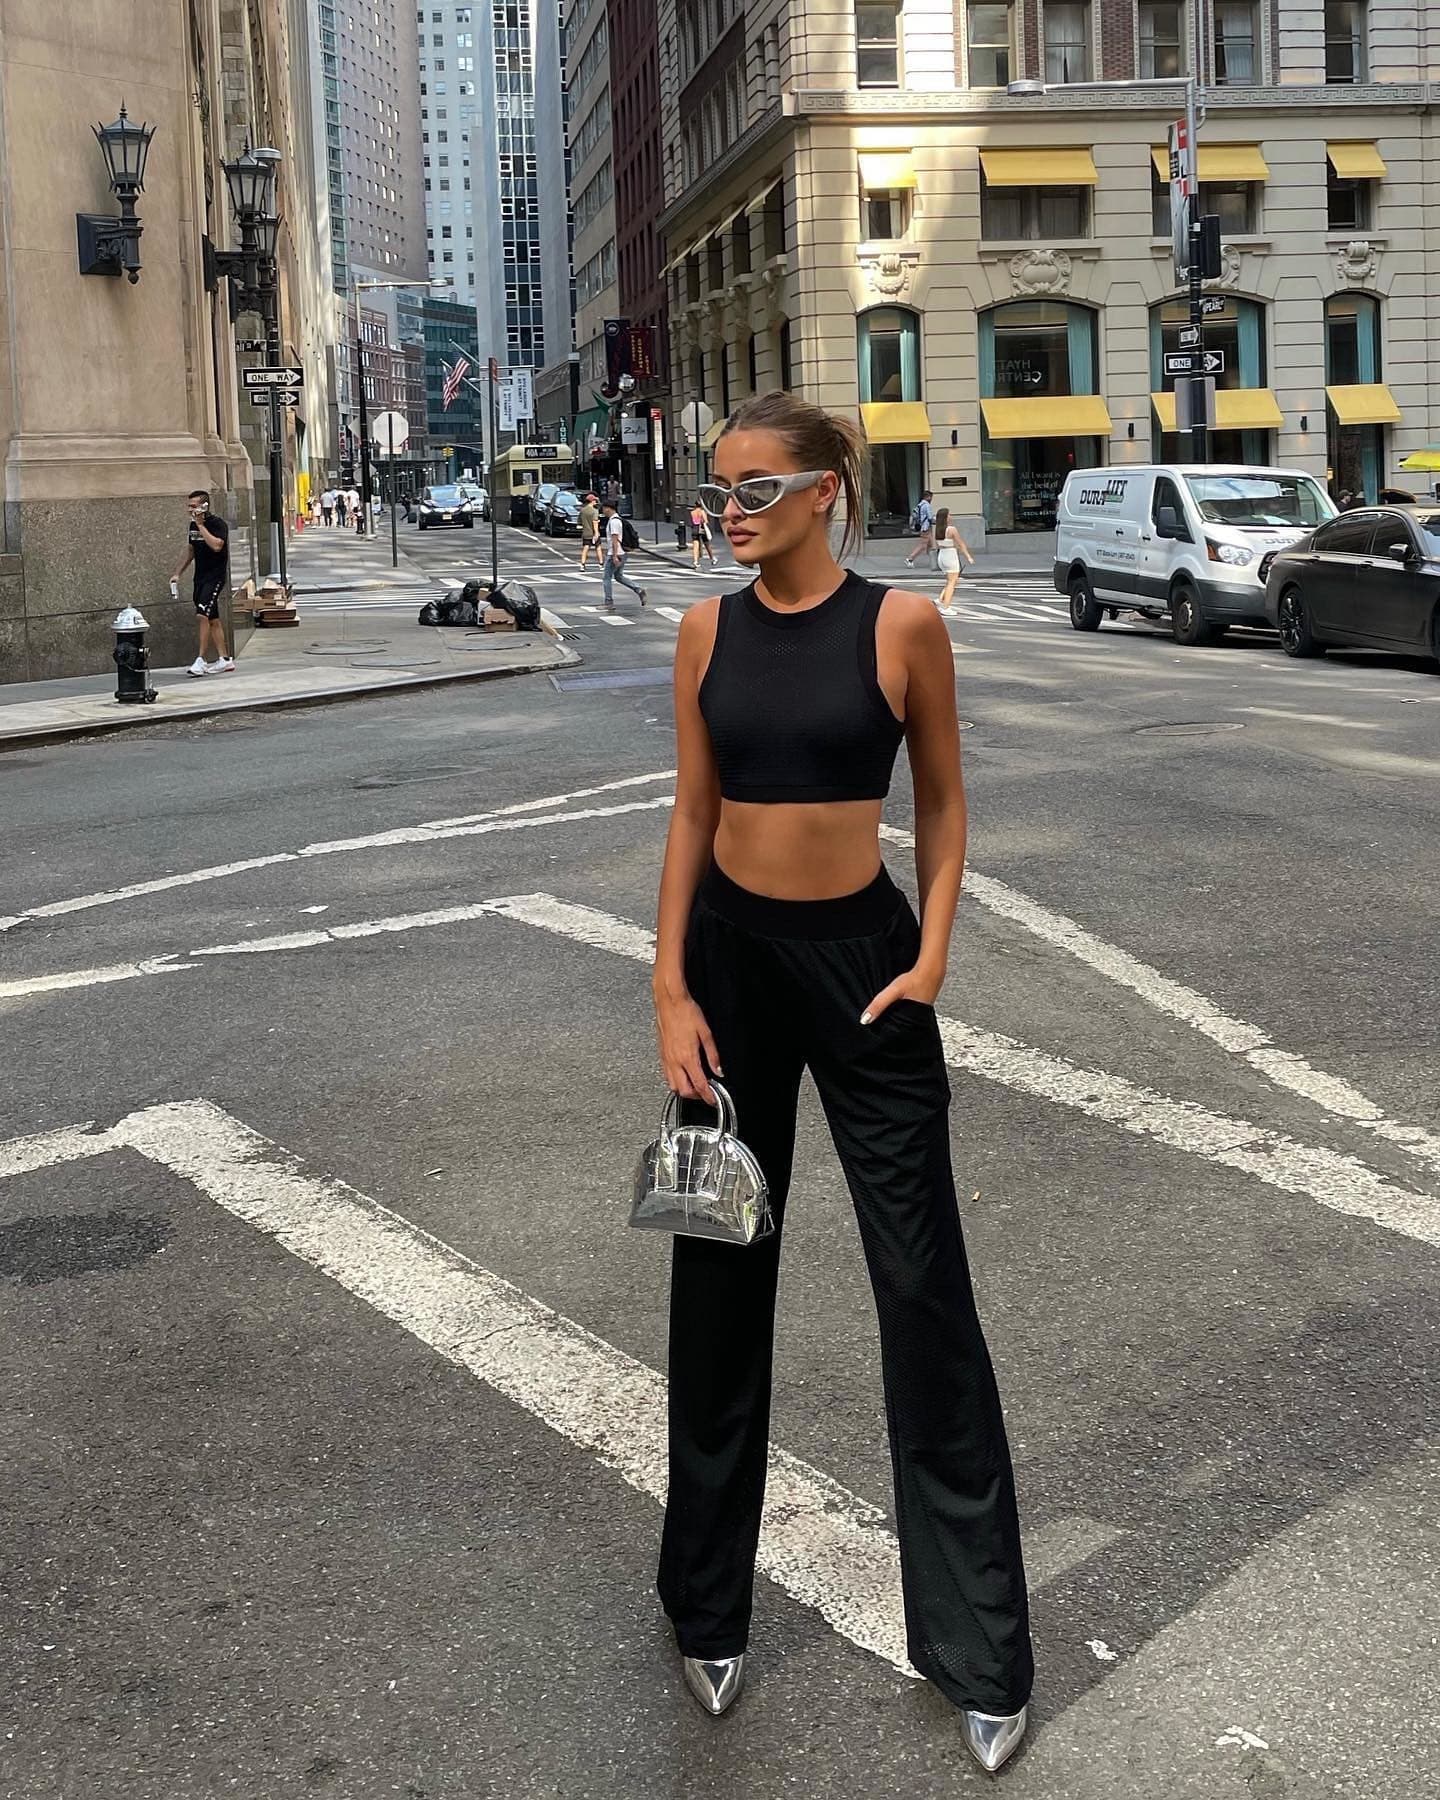 @lexiwood wearing an all-mesh matching set in black with a pair of chrome heels and matching small bag while standing in a crosswalk in a large city. 